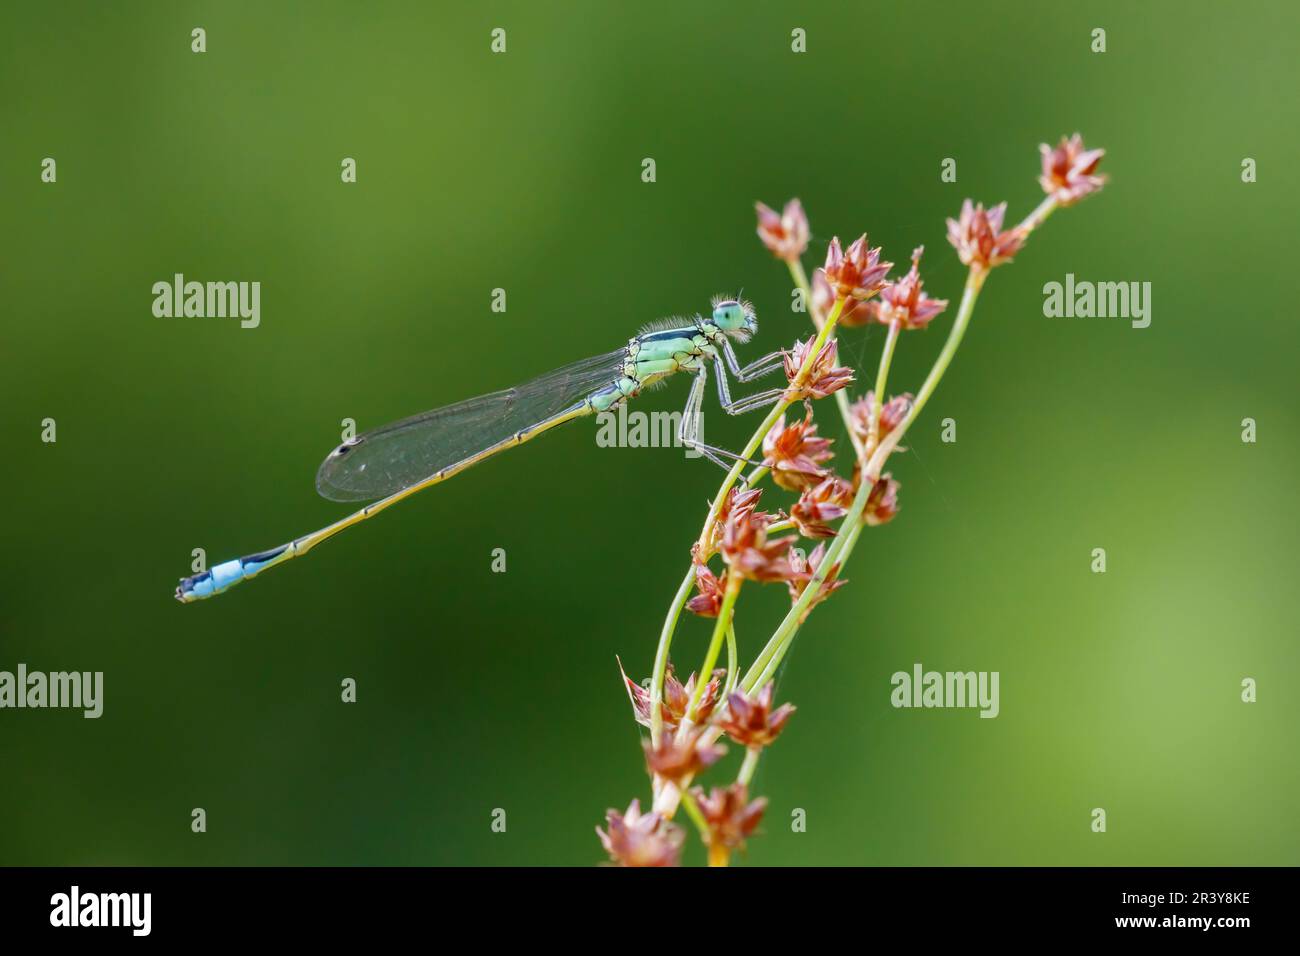 Ischnura elegans, known as Blue-tailed damselfly, Common bluetail Stock Photo